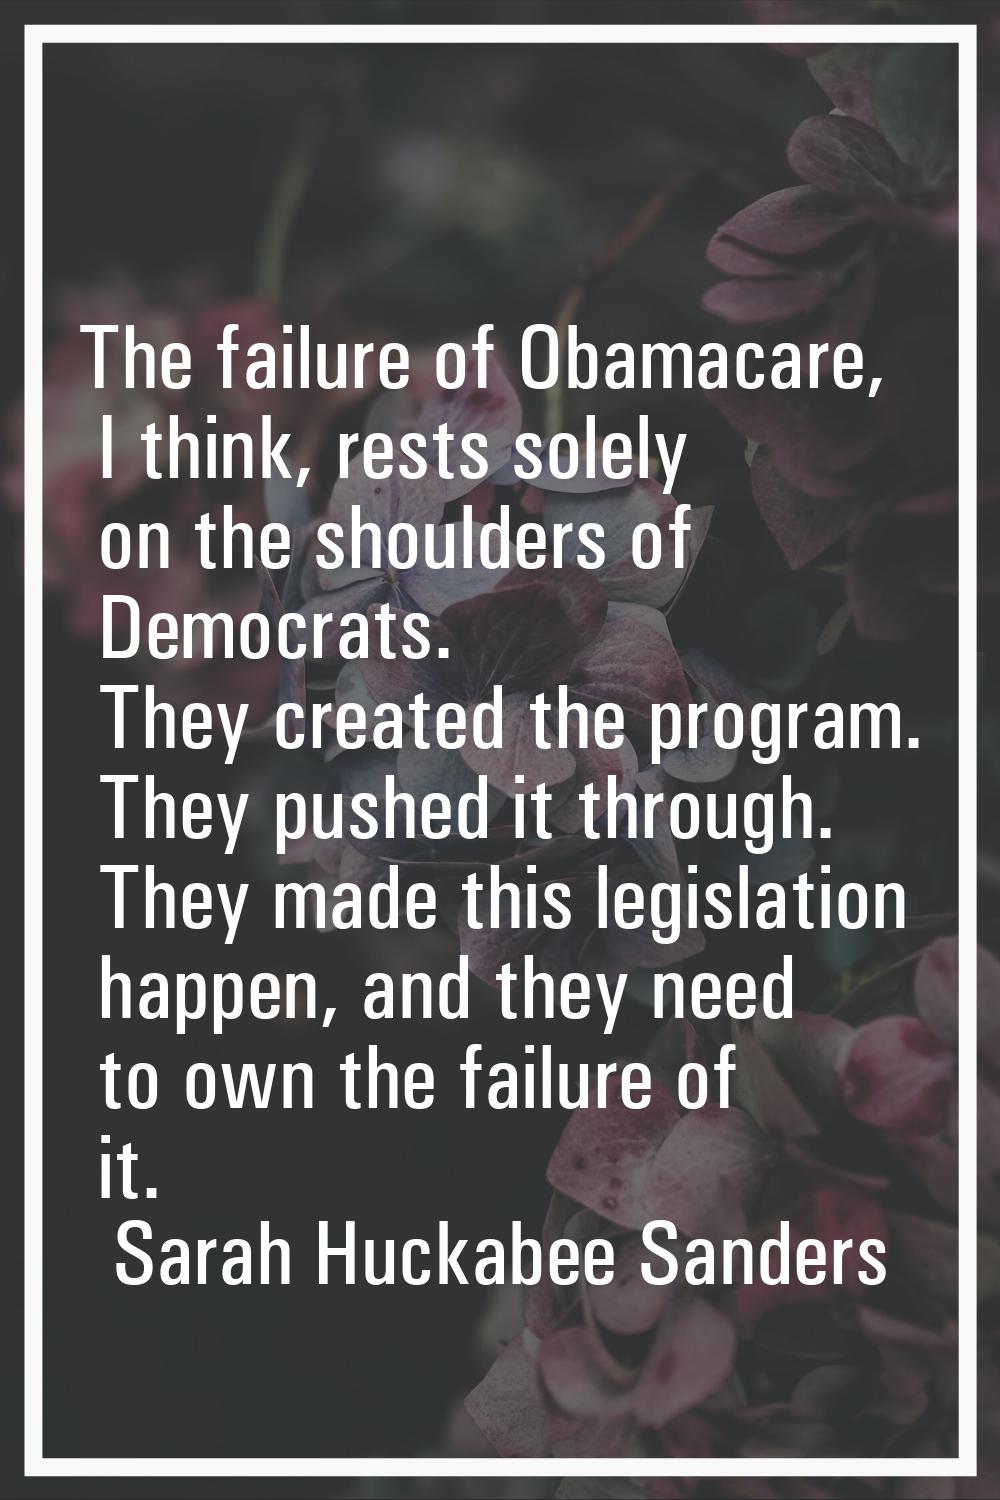 The failure of Obamacare, I think, rests solely on the shoulders of Democrats. They created the pro